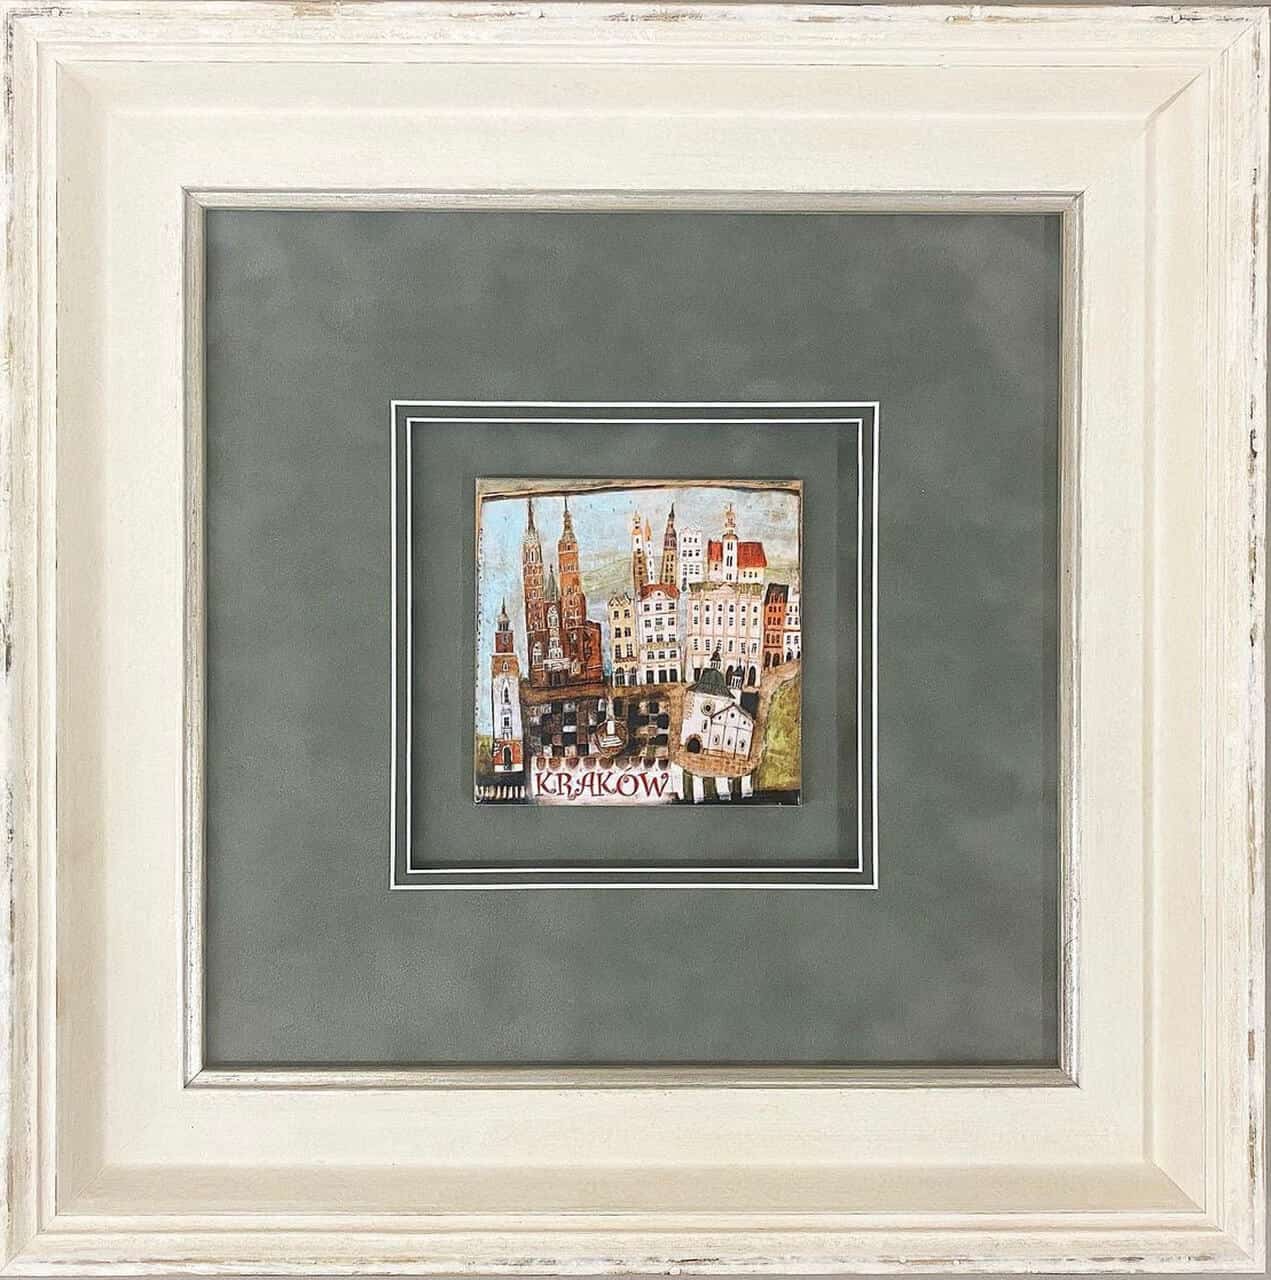 A framed picture of a city in a white frame